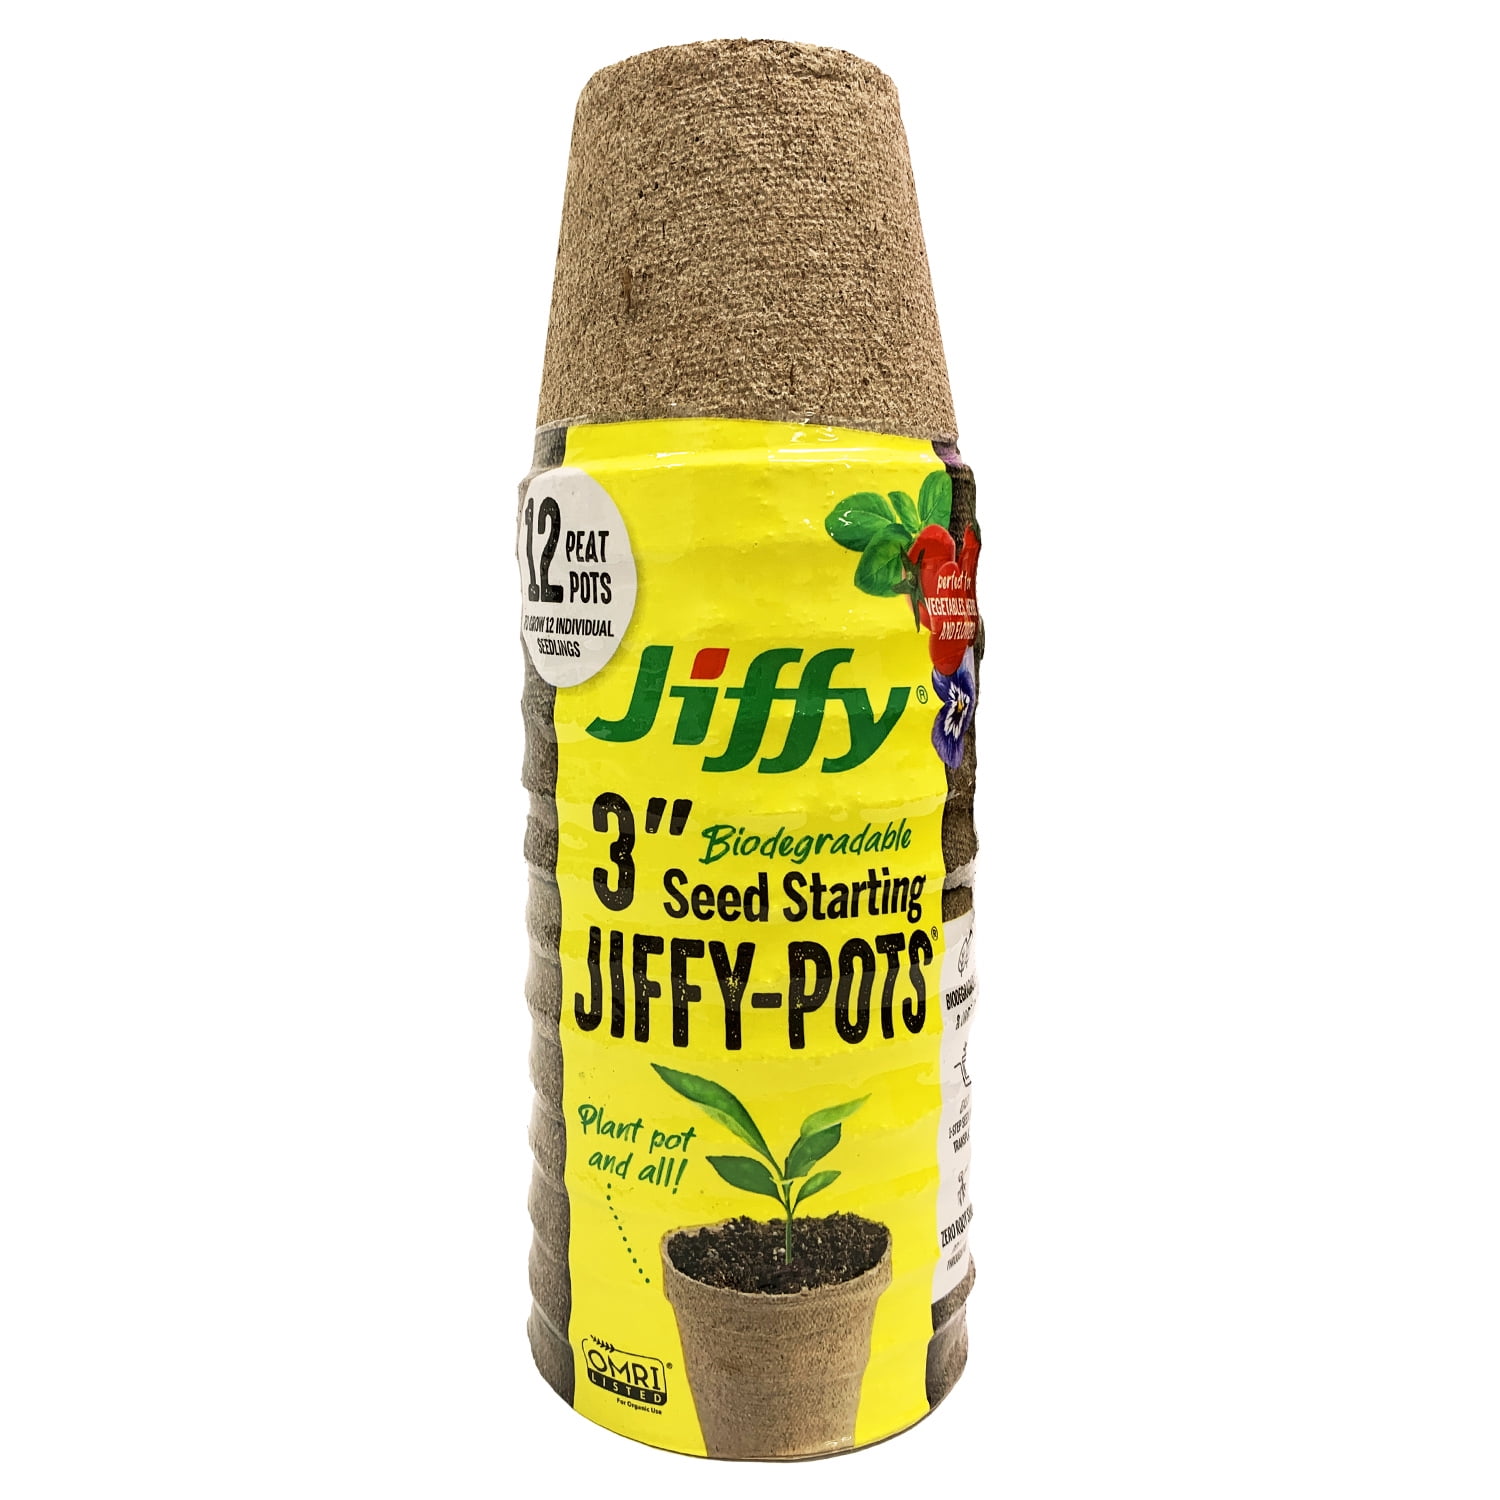 12-Pack JiffyPots Seed Starting Biodegradable 3" Diameter Peat Pots $2.97 + Free S&H w/ Walmart+ or on $35+